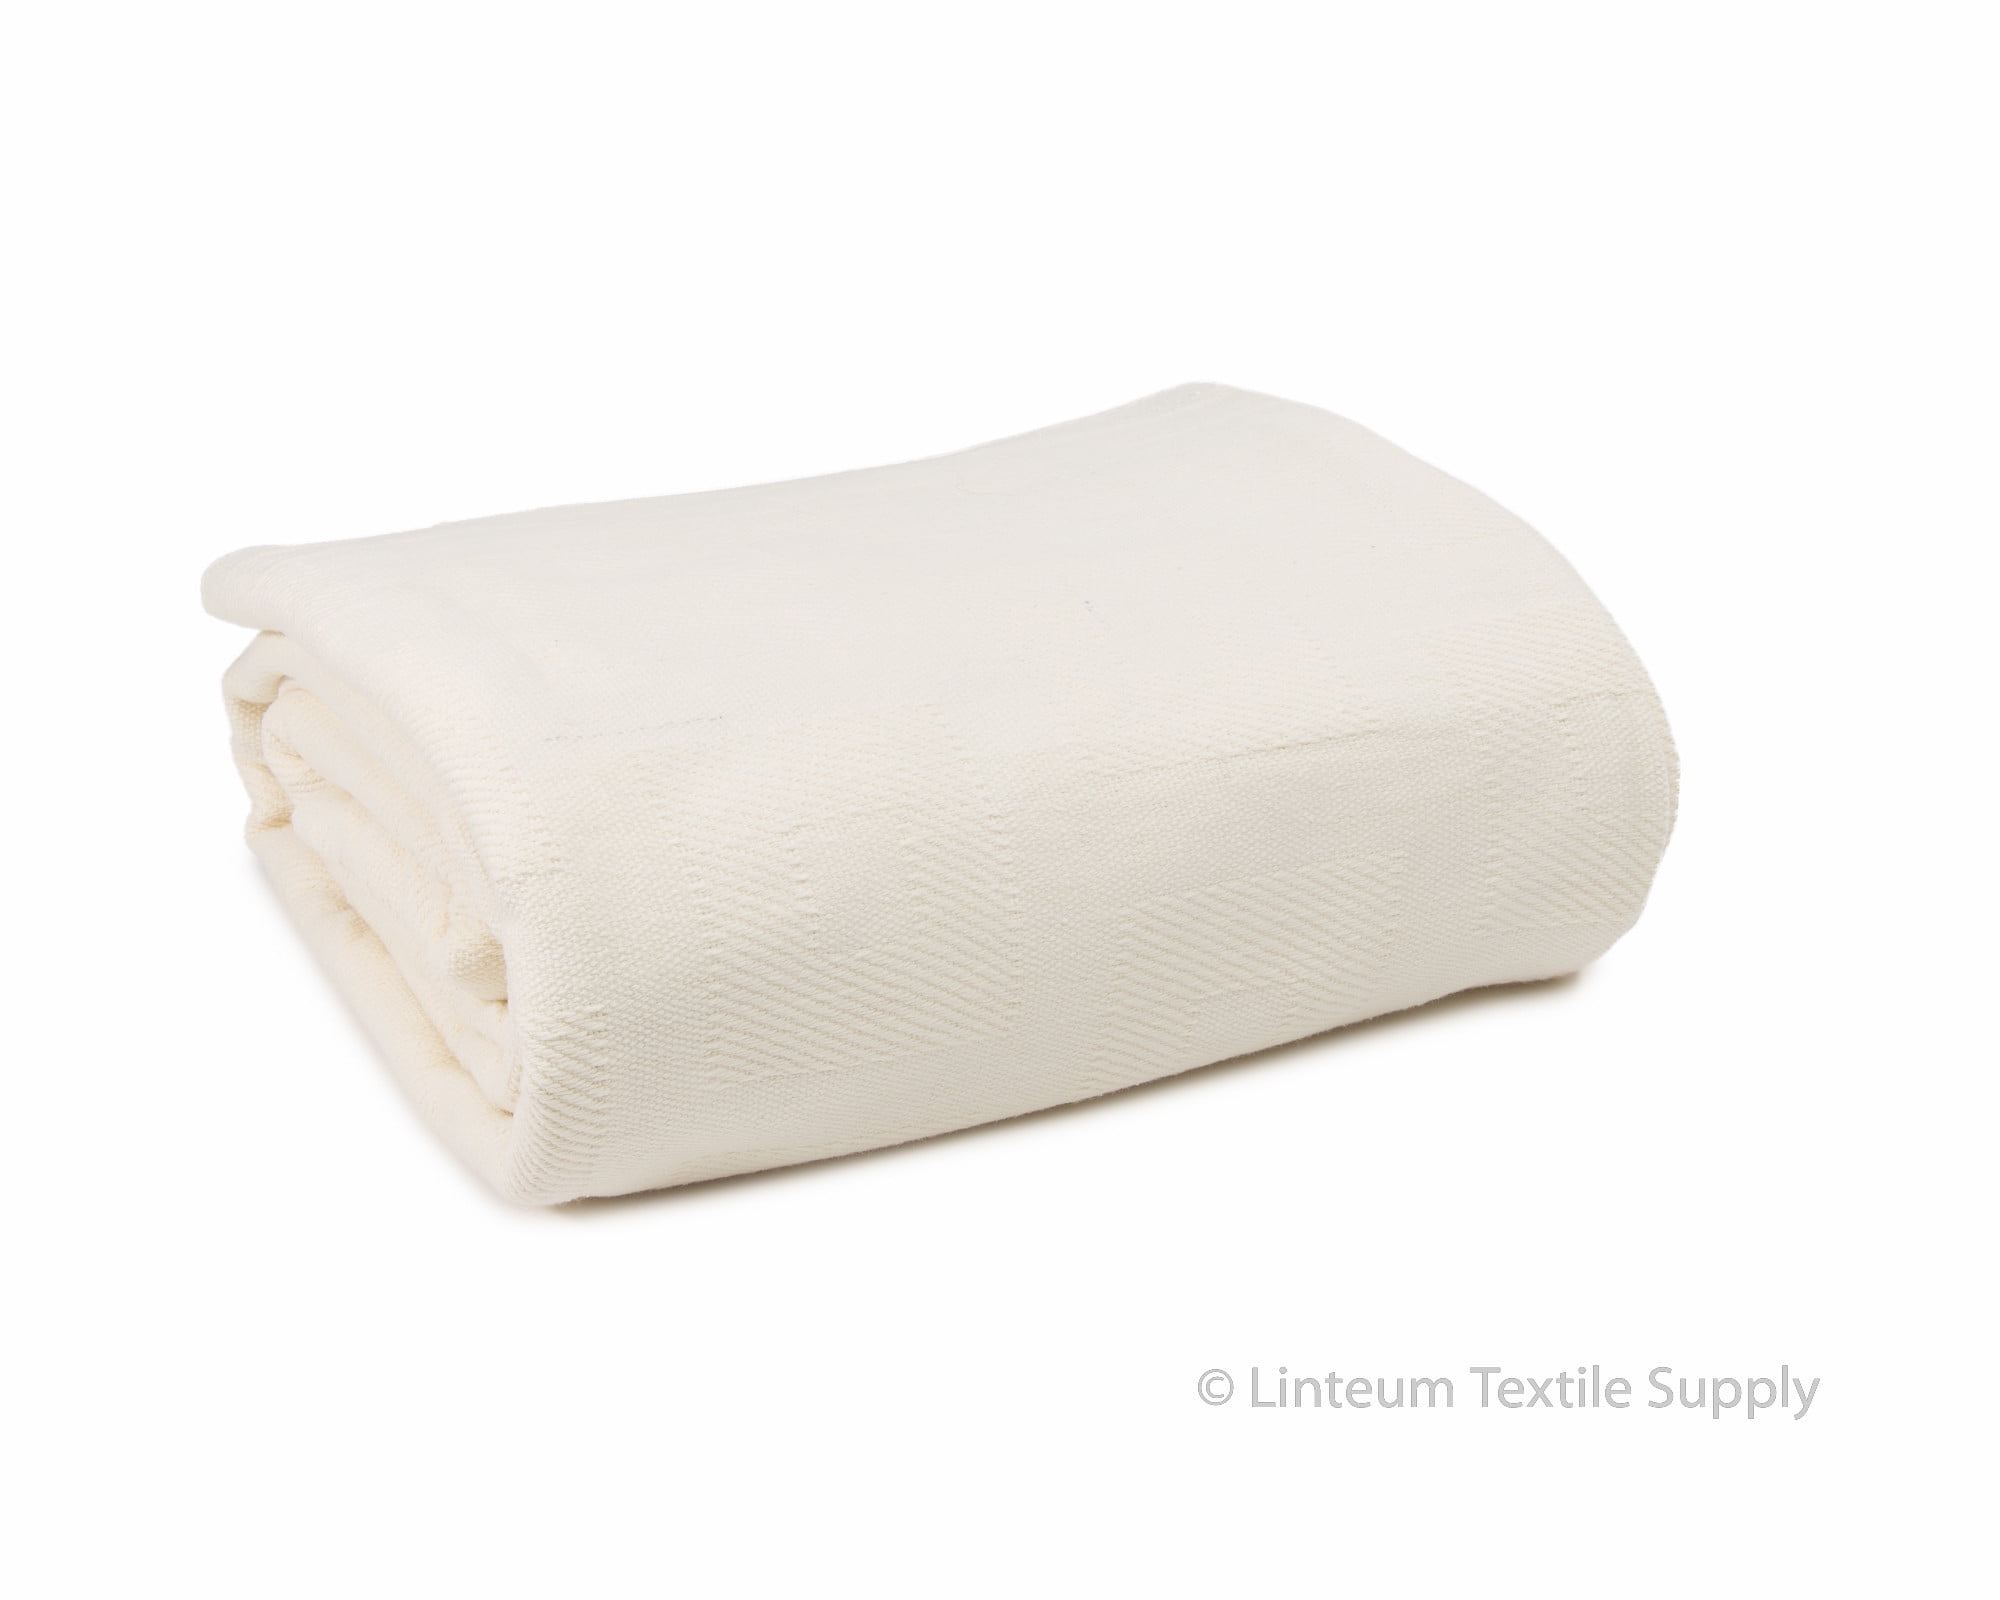 Linteum Textile Hospital Thermal SNAGLESS Spread Blanket, 100% Cotton  (74x100 in, White)